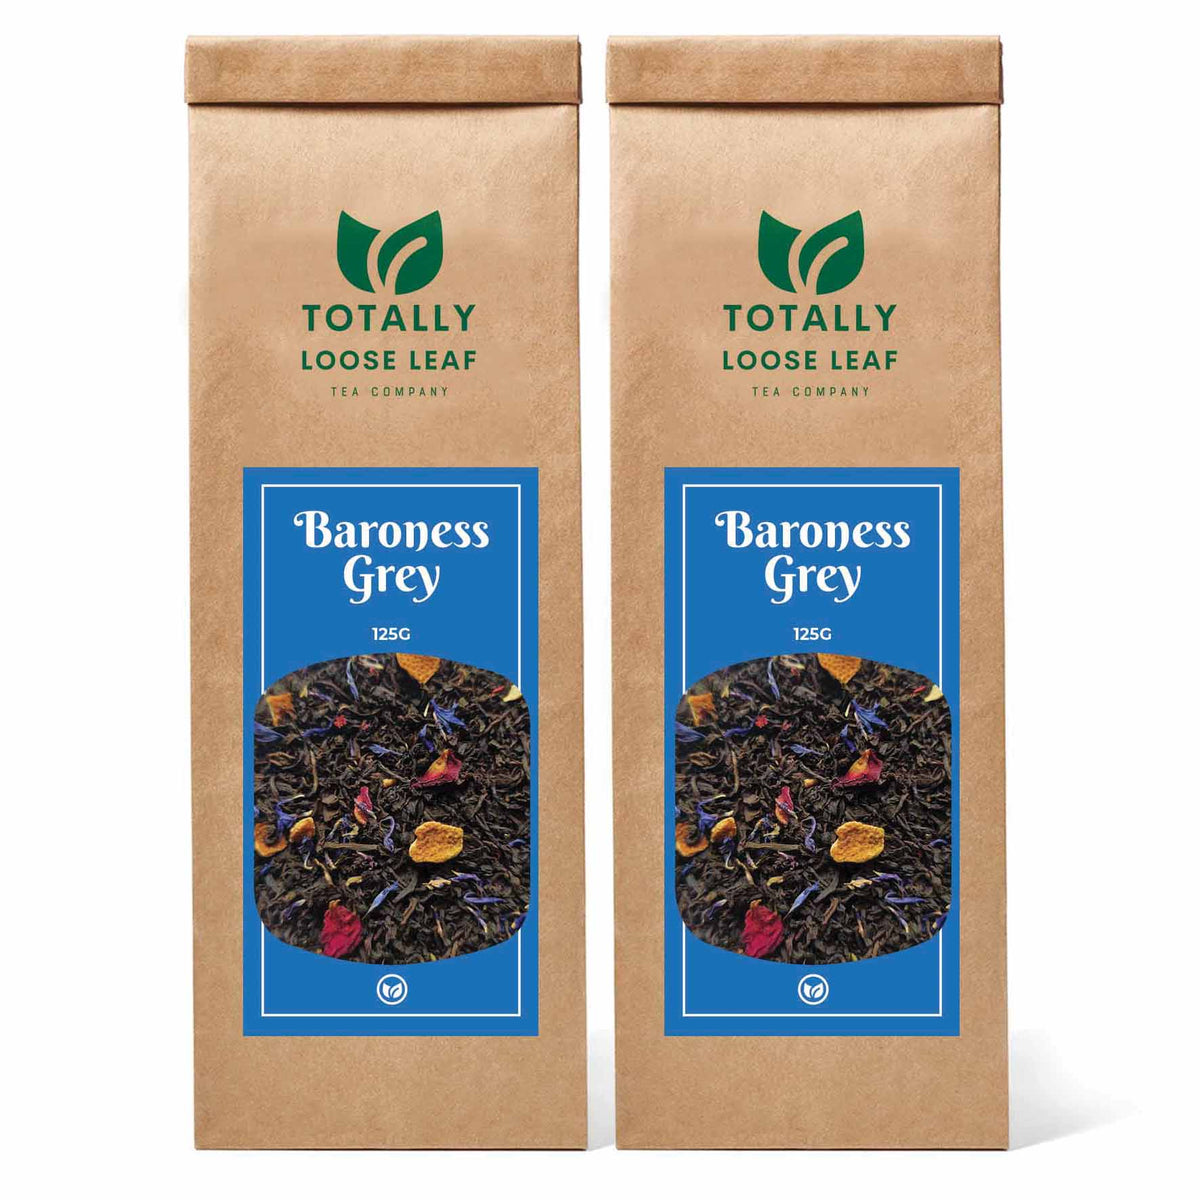 Baroness Grey Breakfast Loose Leaf Tea - two pouches